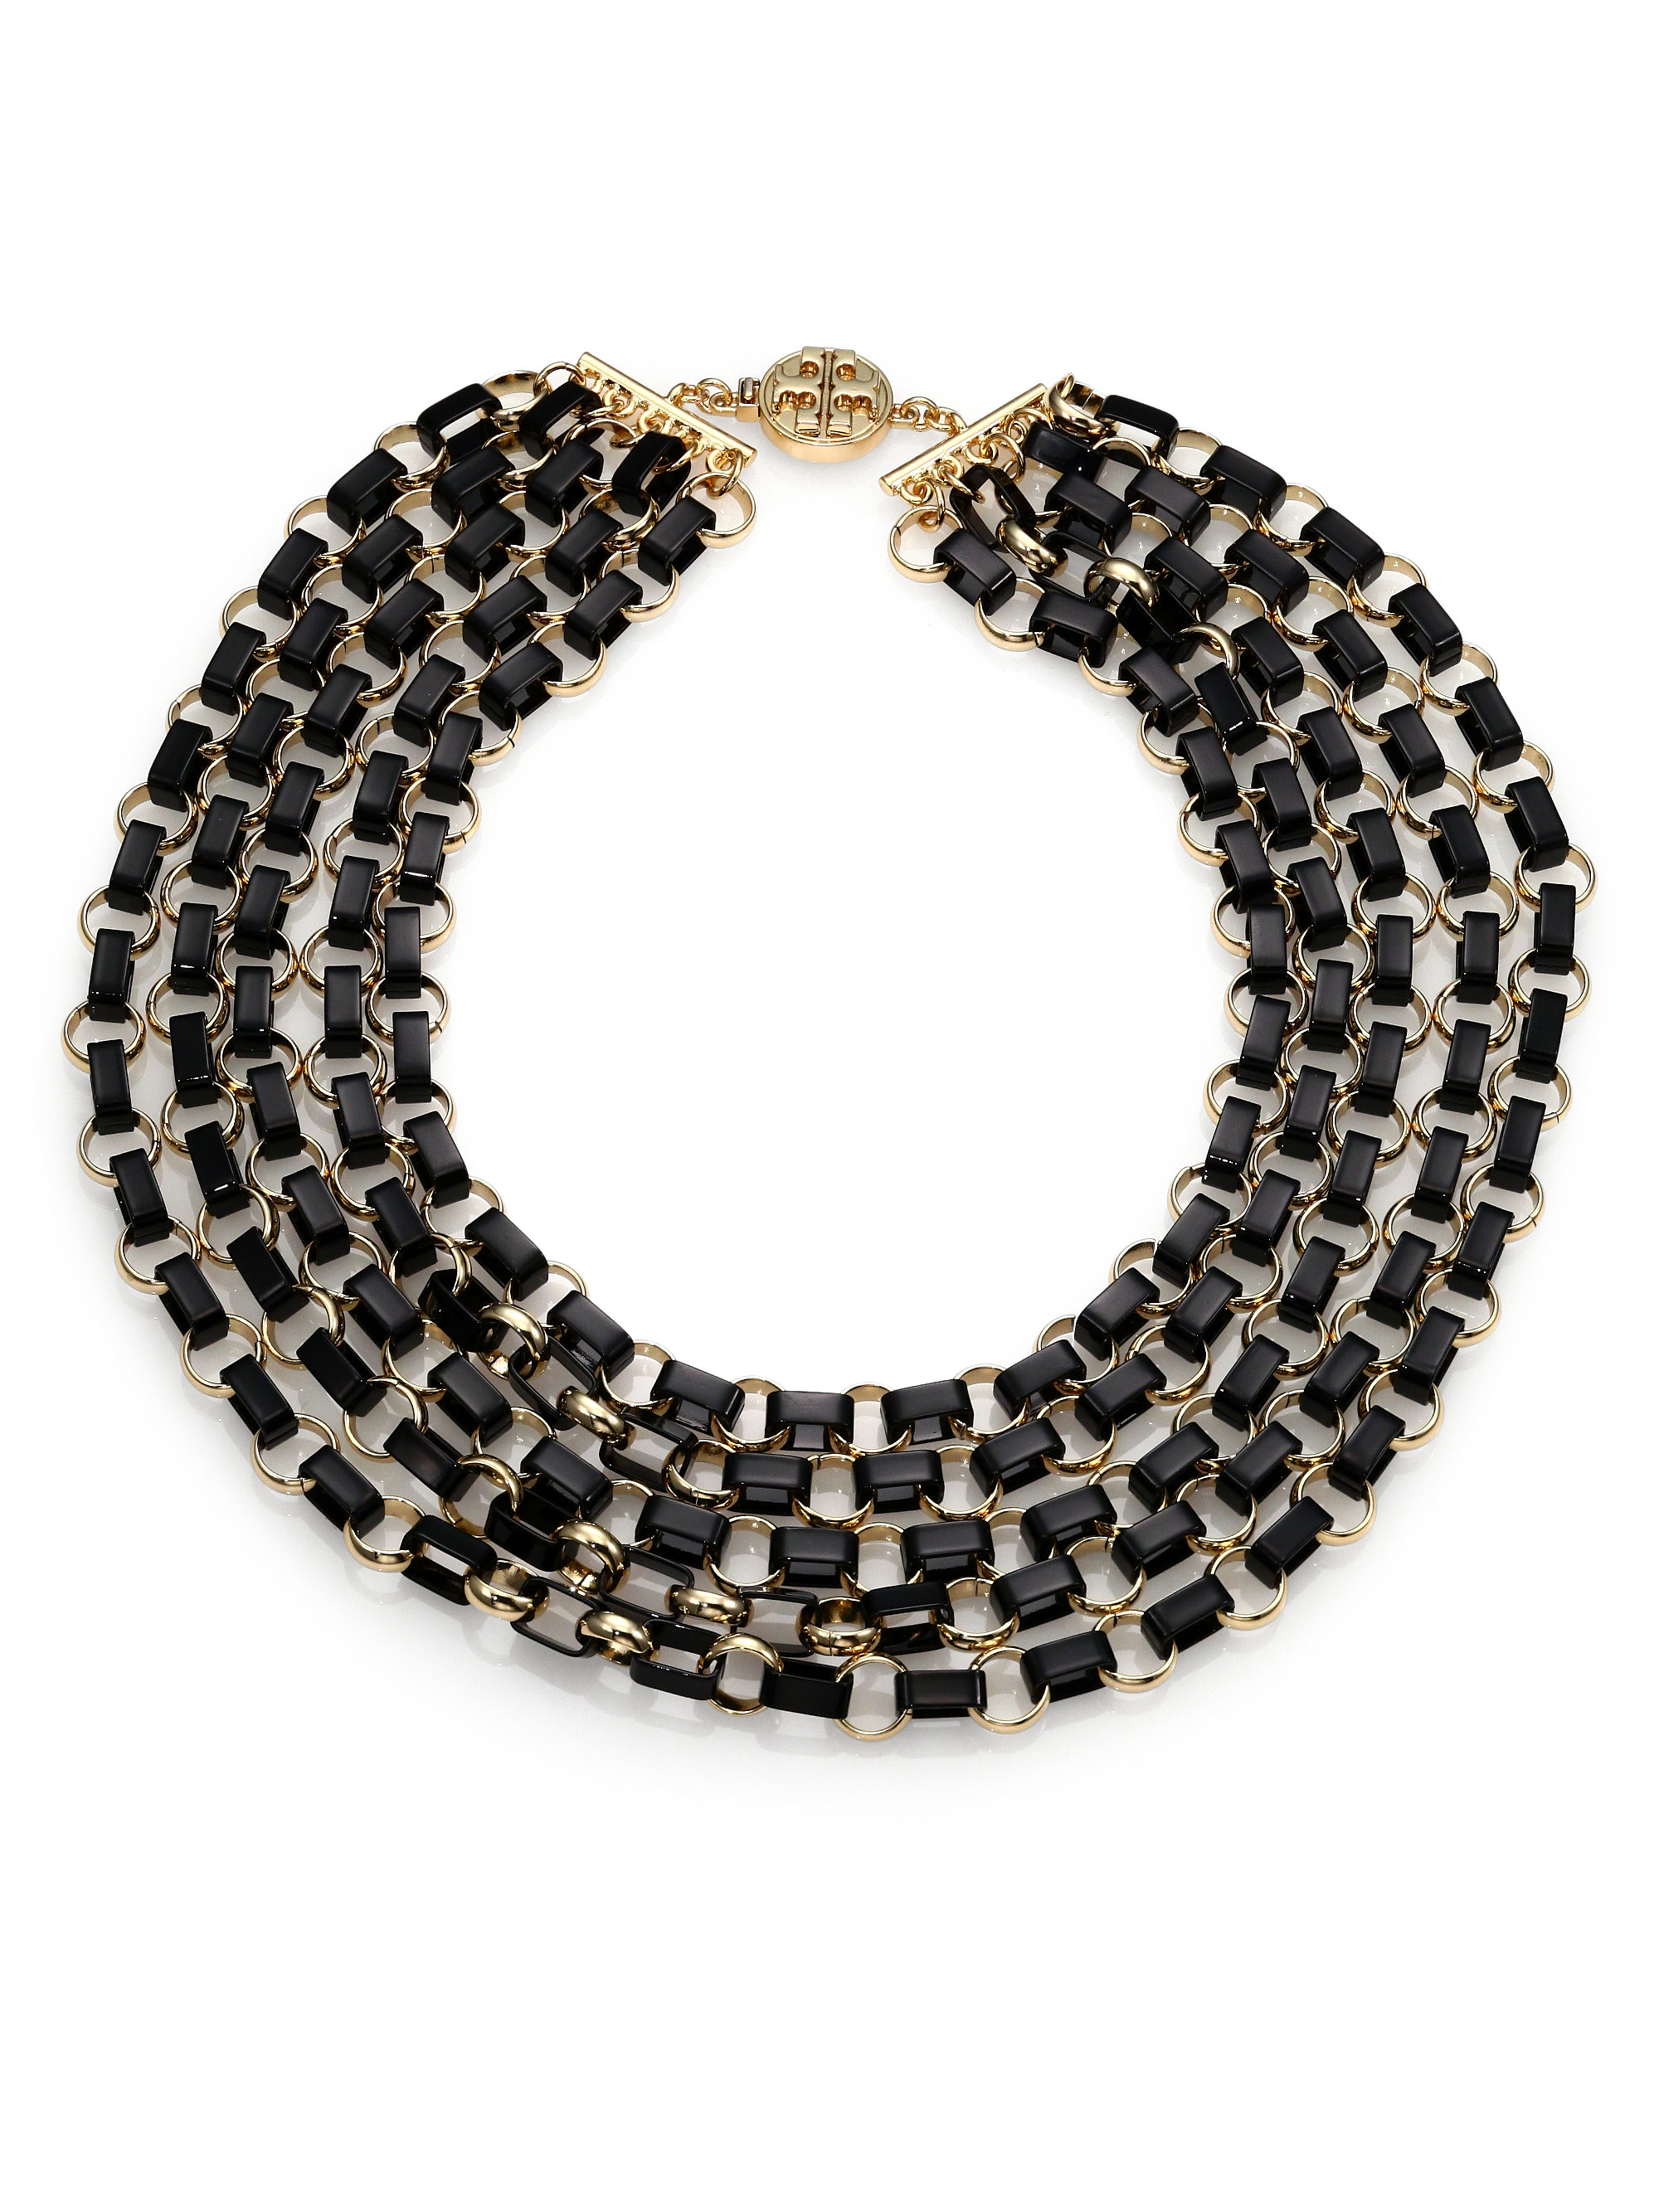 Tory Burch Aselma Leather Multi-Strand Necklace in Black - Lyst